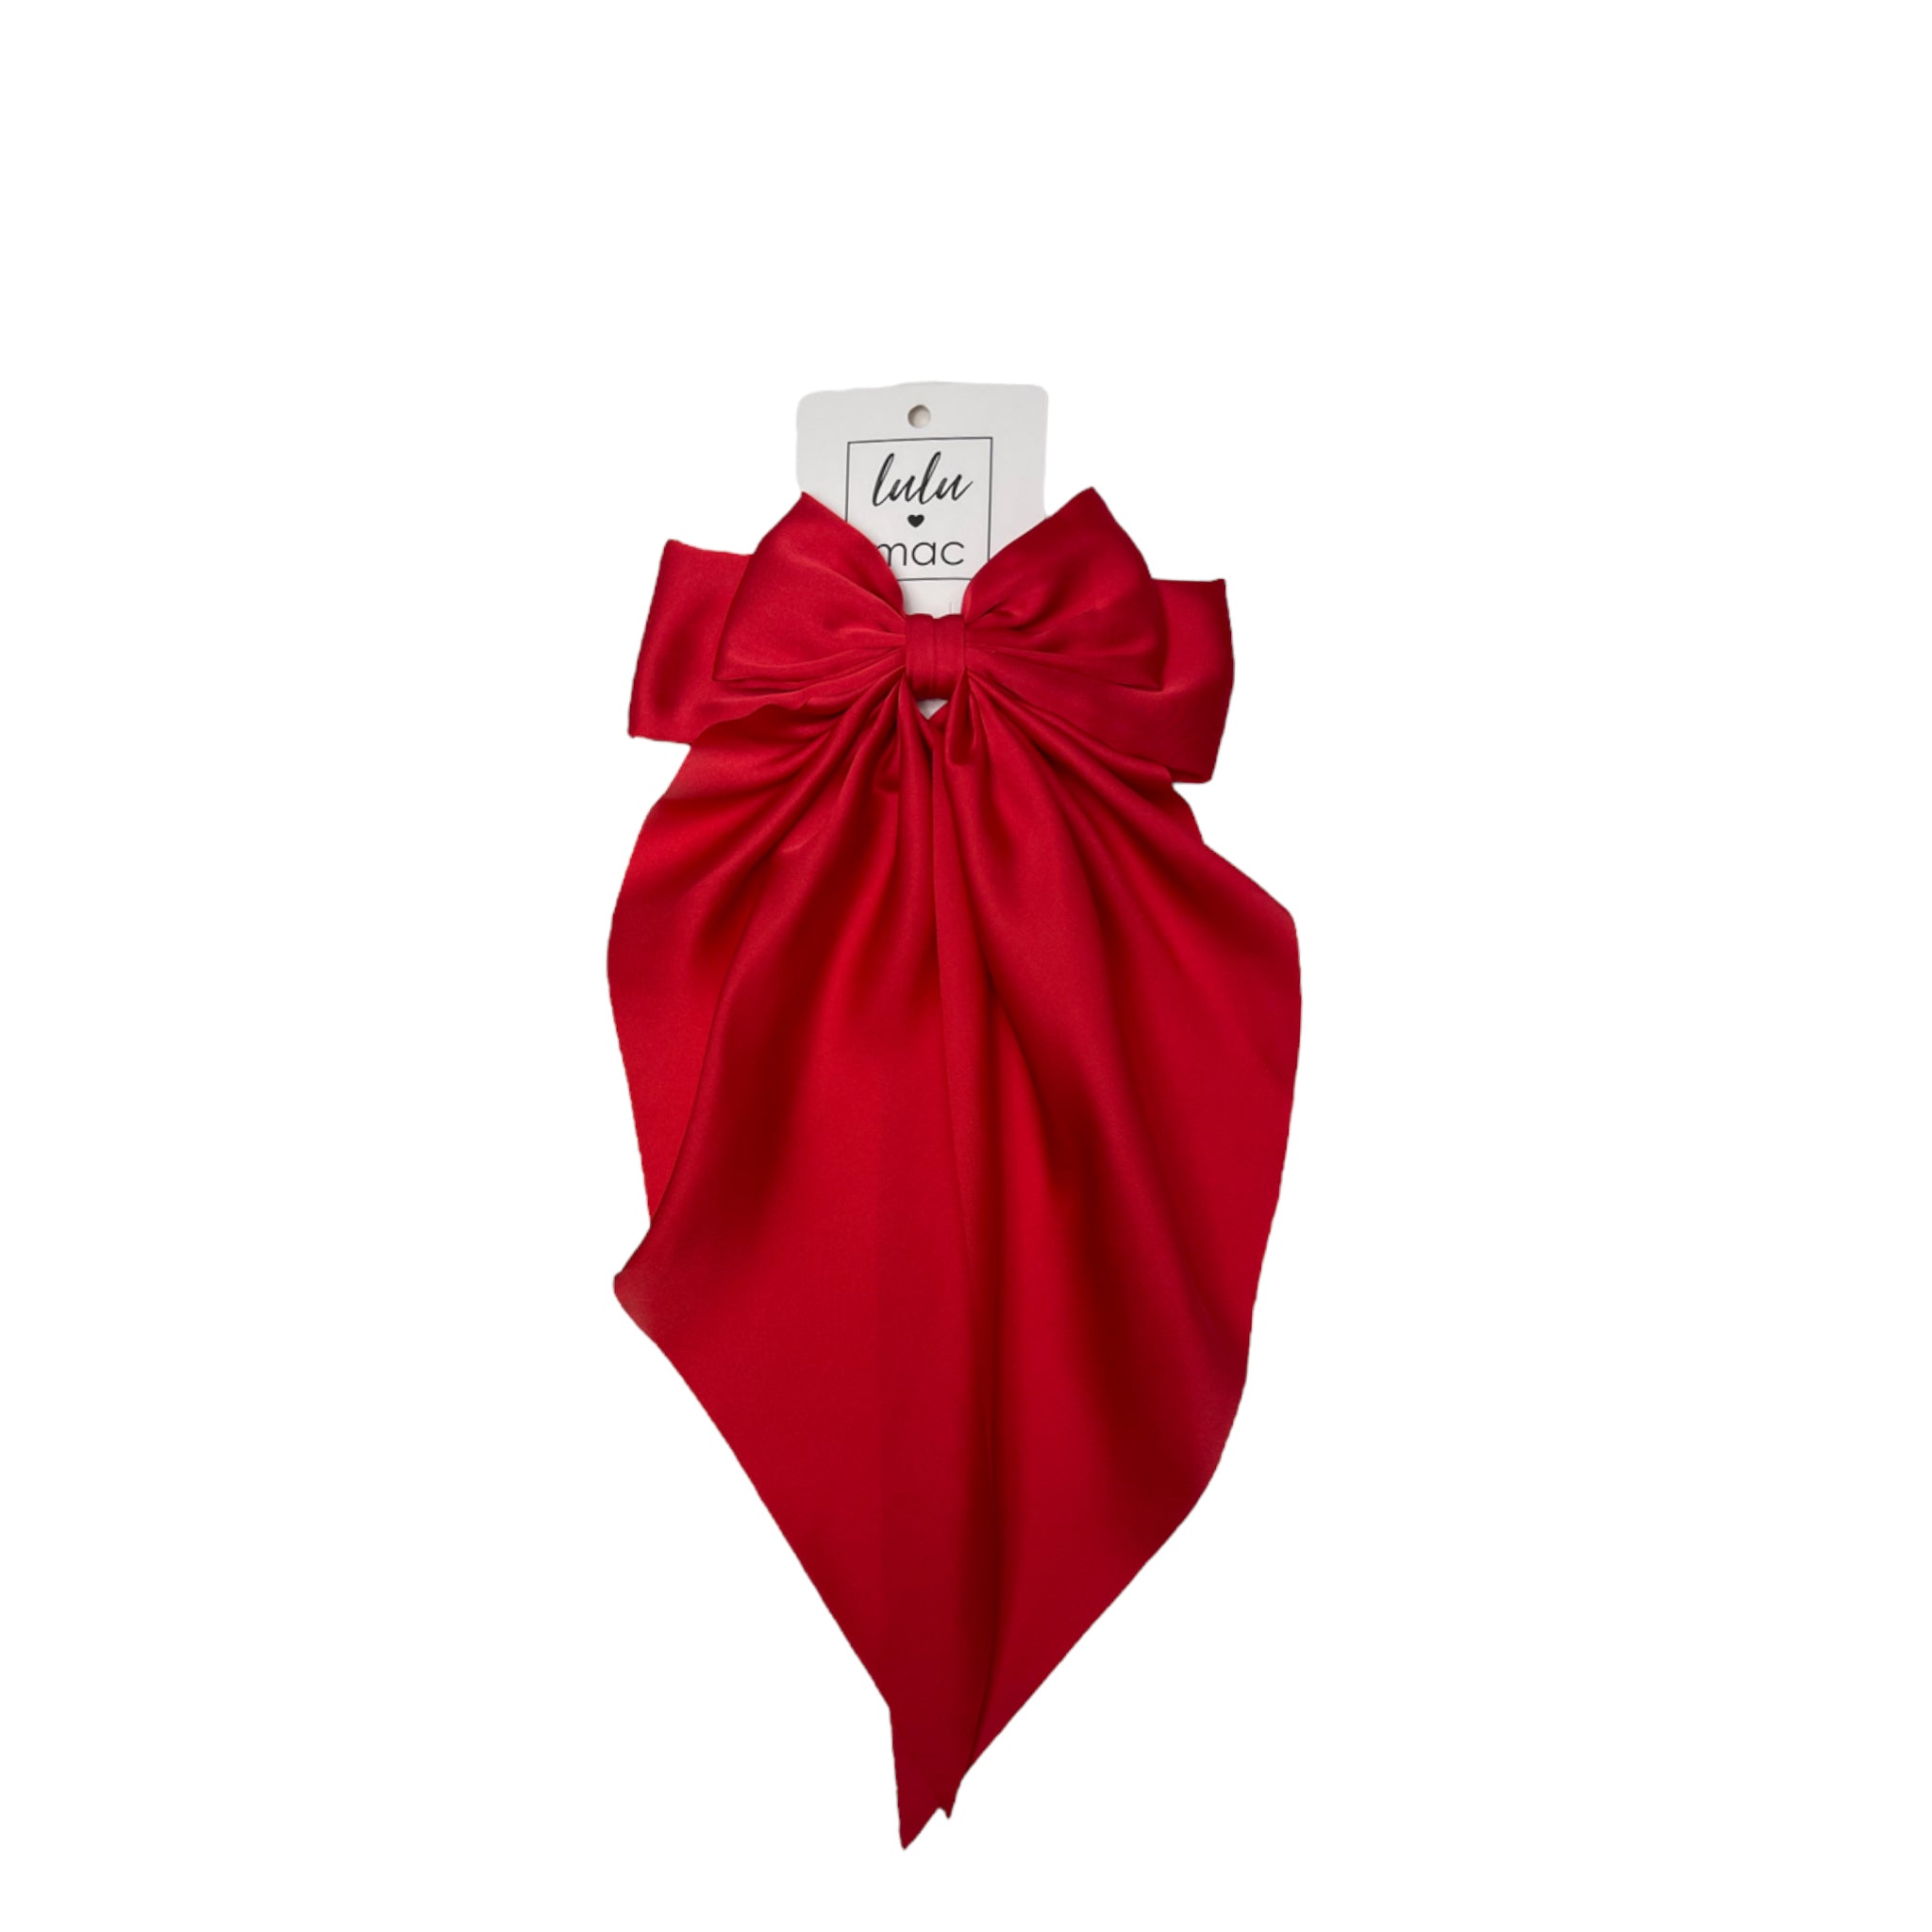 DDL-2270 Large Satin Bow Red